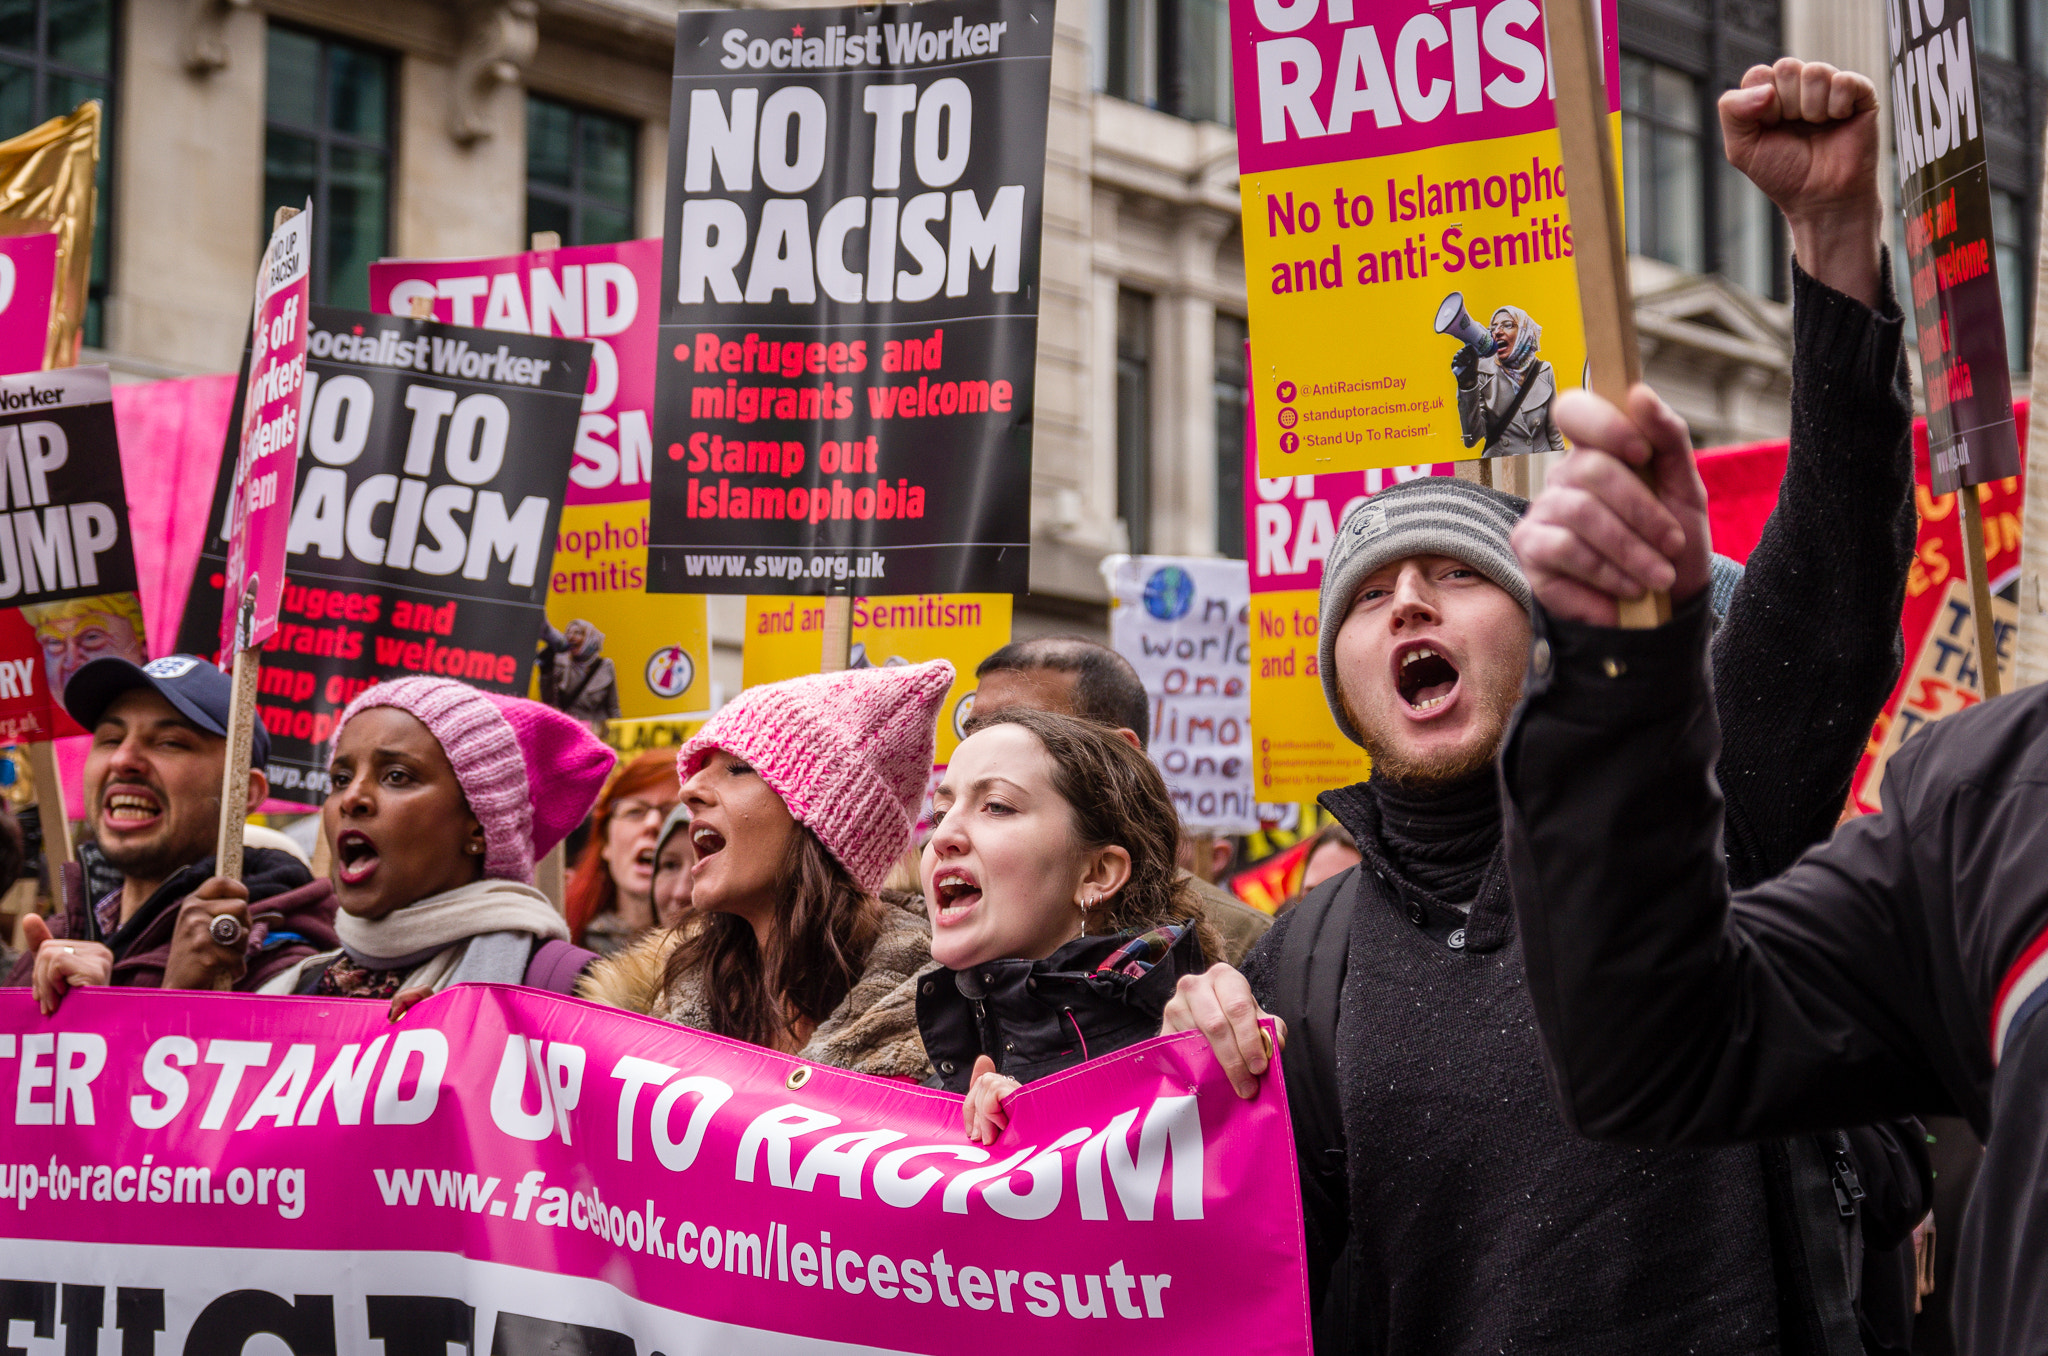 Pentax smc DA* 16-50mm F2.8 ED AL (IF) SDM sample photo. Stand up to racism march, london, march 2017 photography